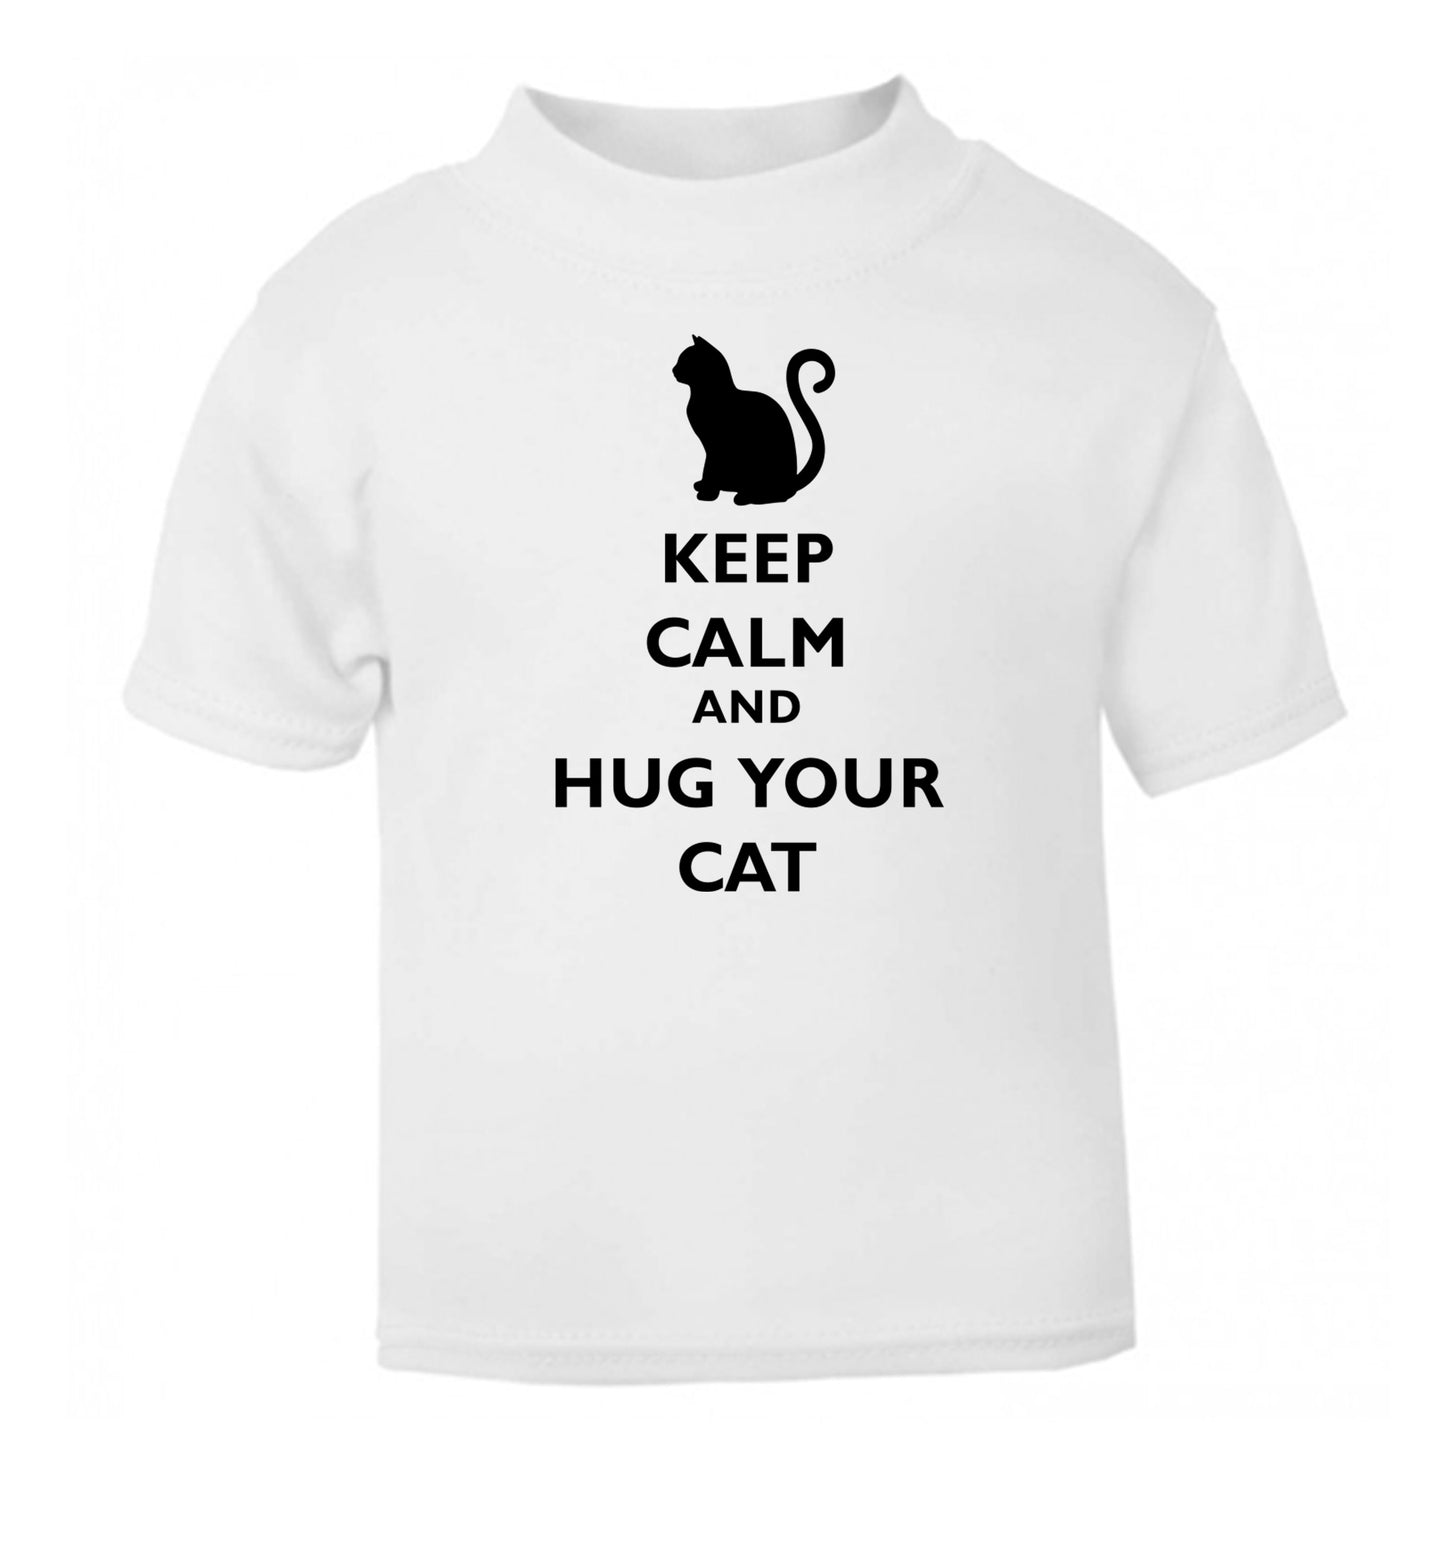 Keep calm and hug your cat white Baby Toddler Tshirt 2 Years